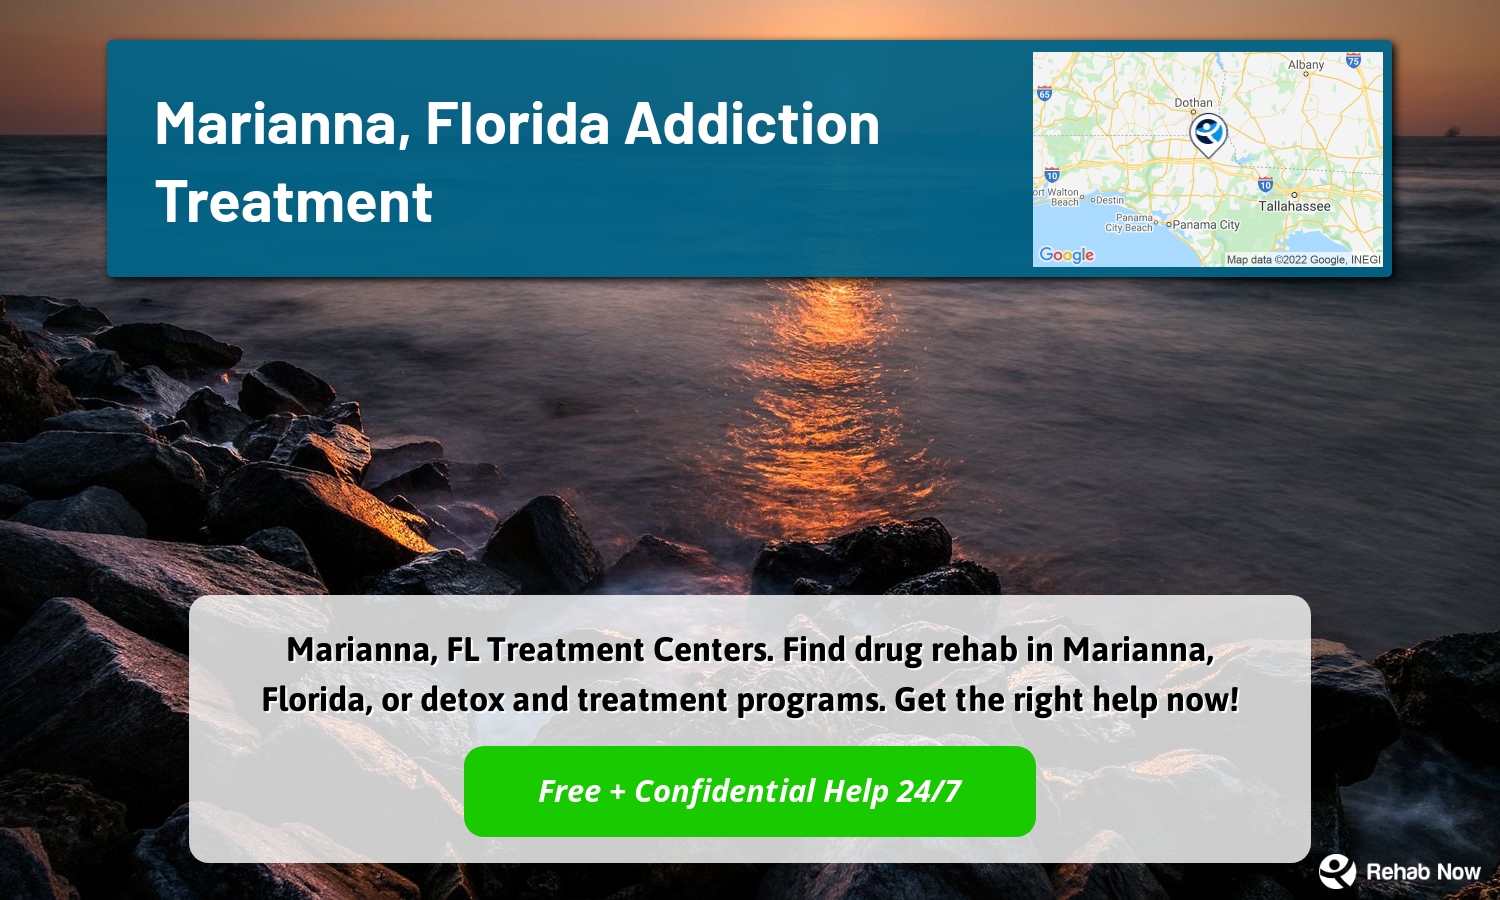 Marianna, FL Treatment Centers. Find drug rehab in Marianna, Florida, or detox and treatment programs. Get the right help now!